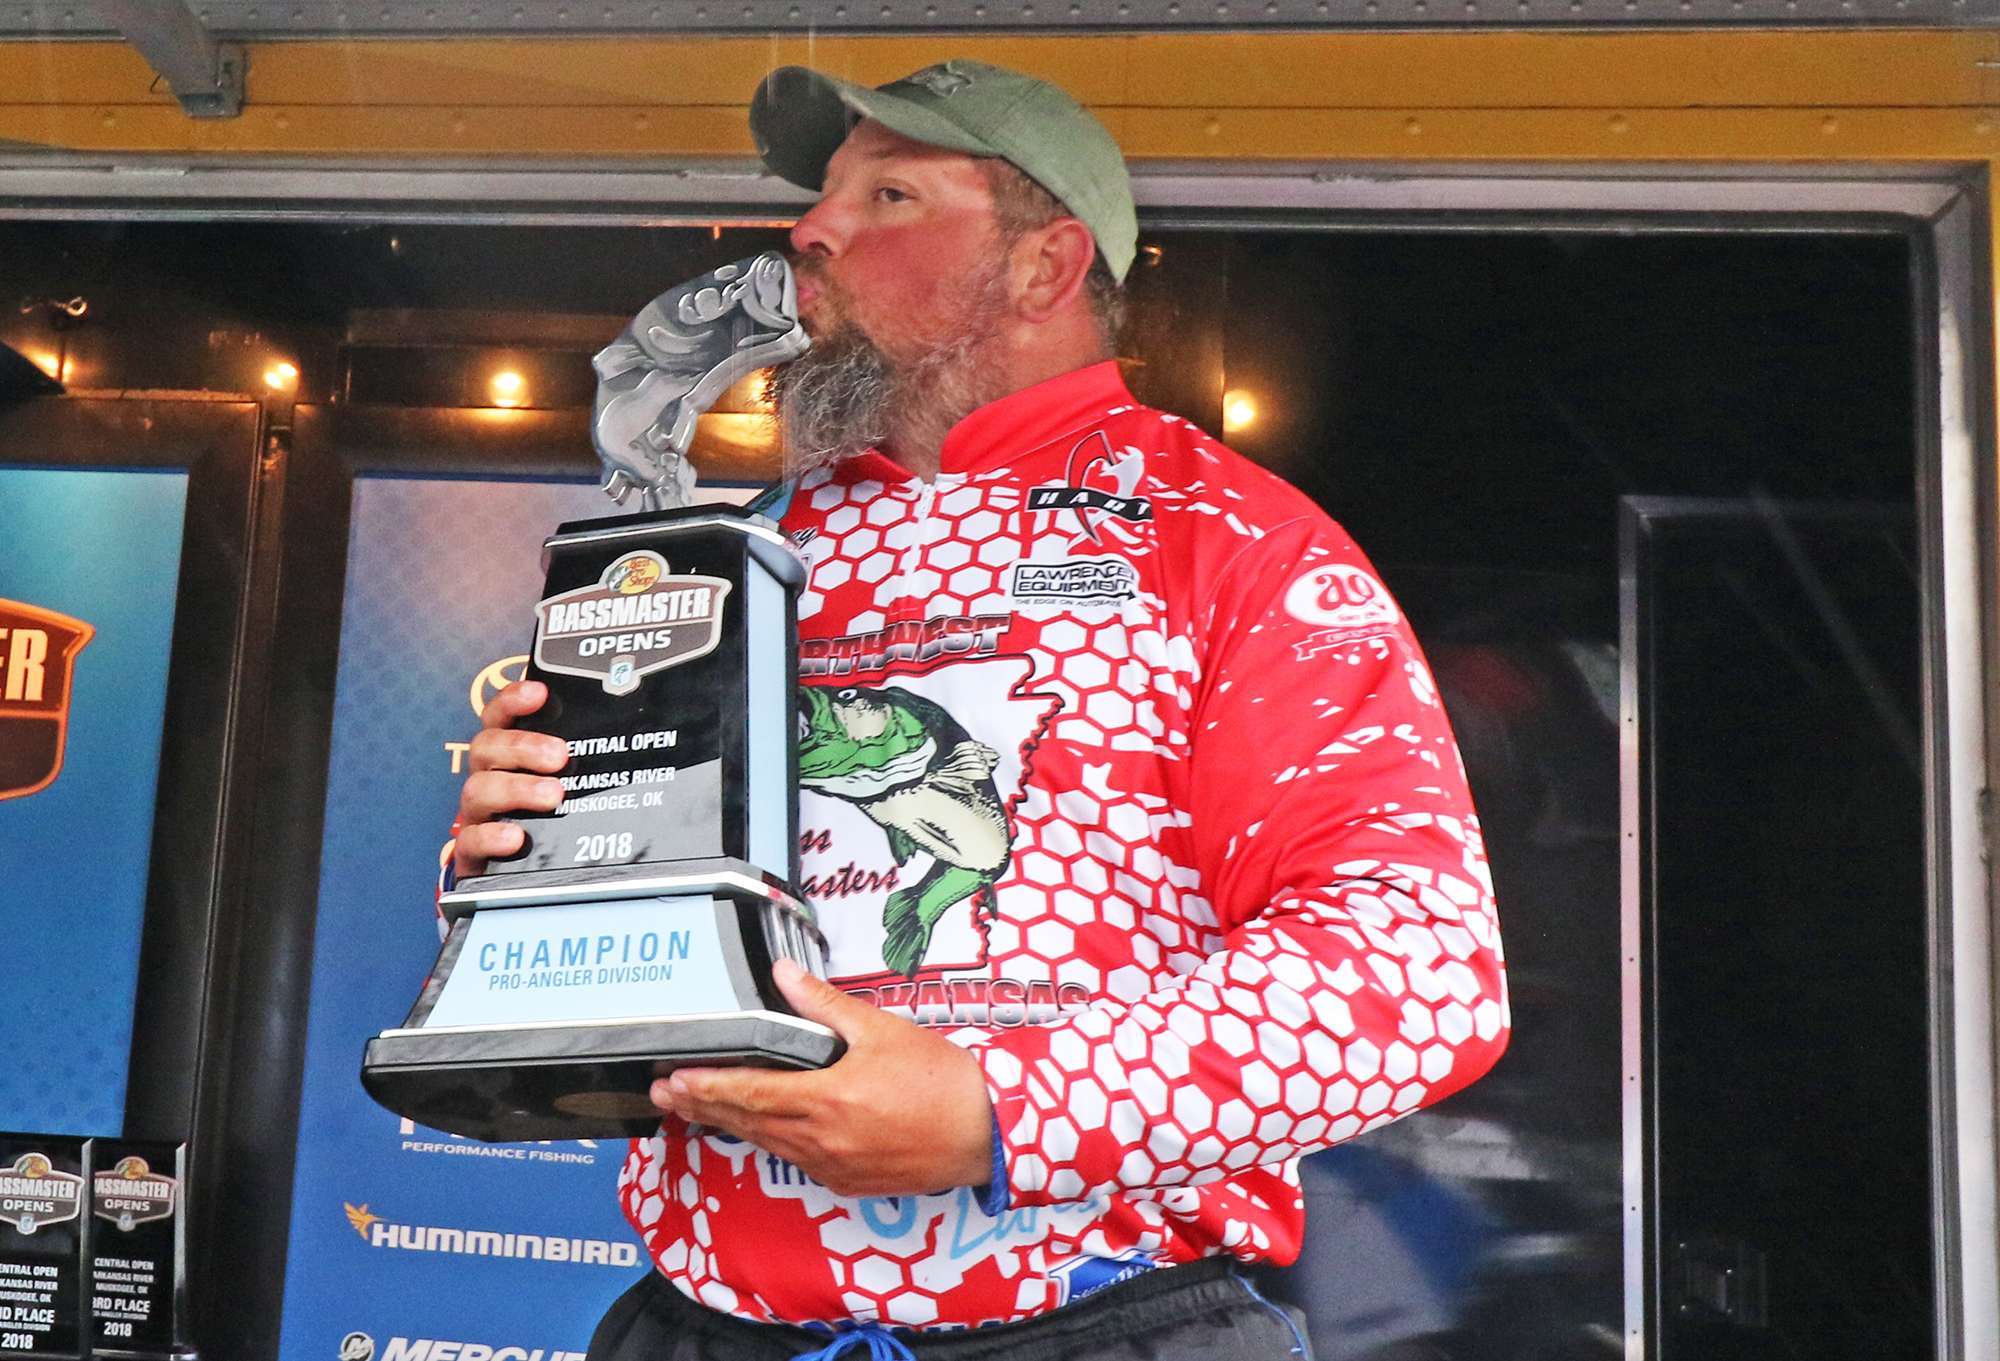 Harvey Horne took the title at the Arkansas River to punch his ticket to the Opens Championship. 